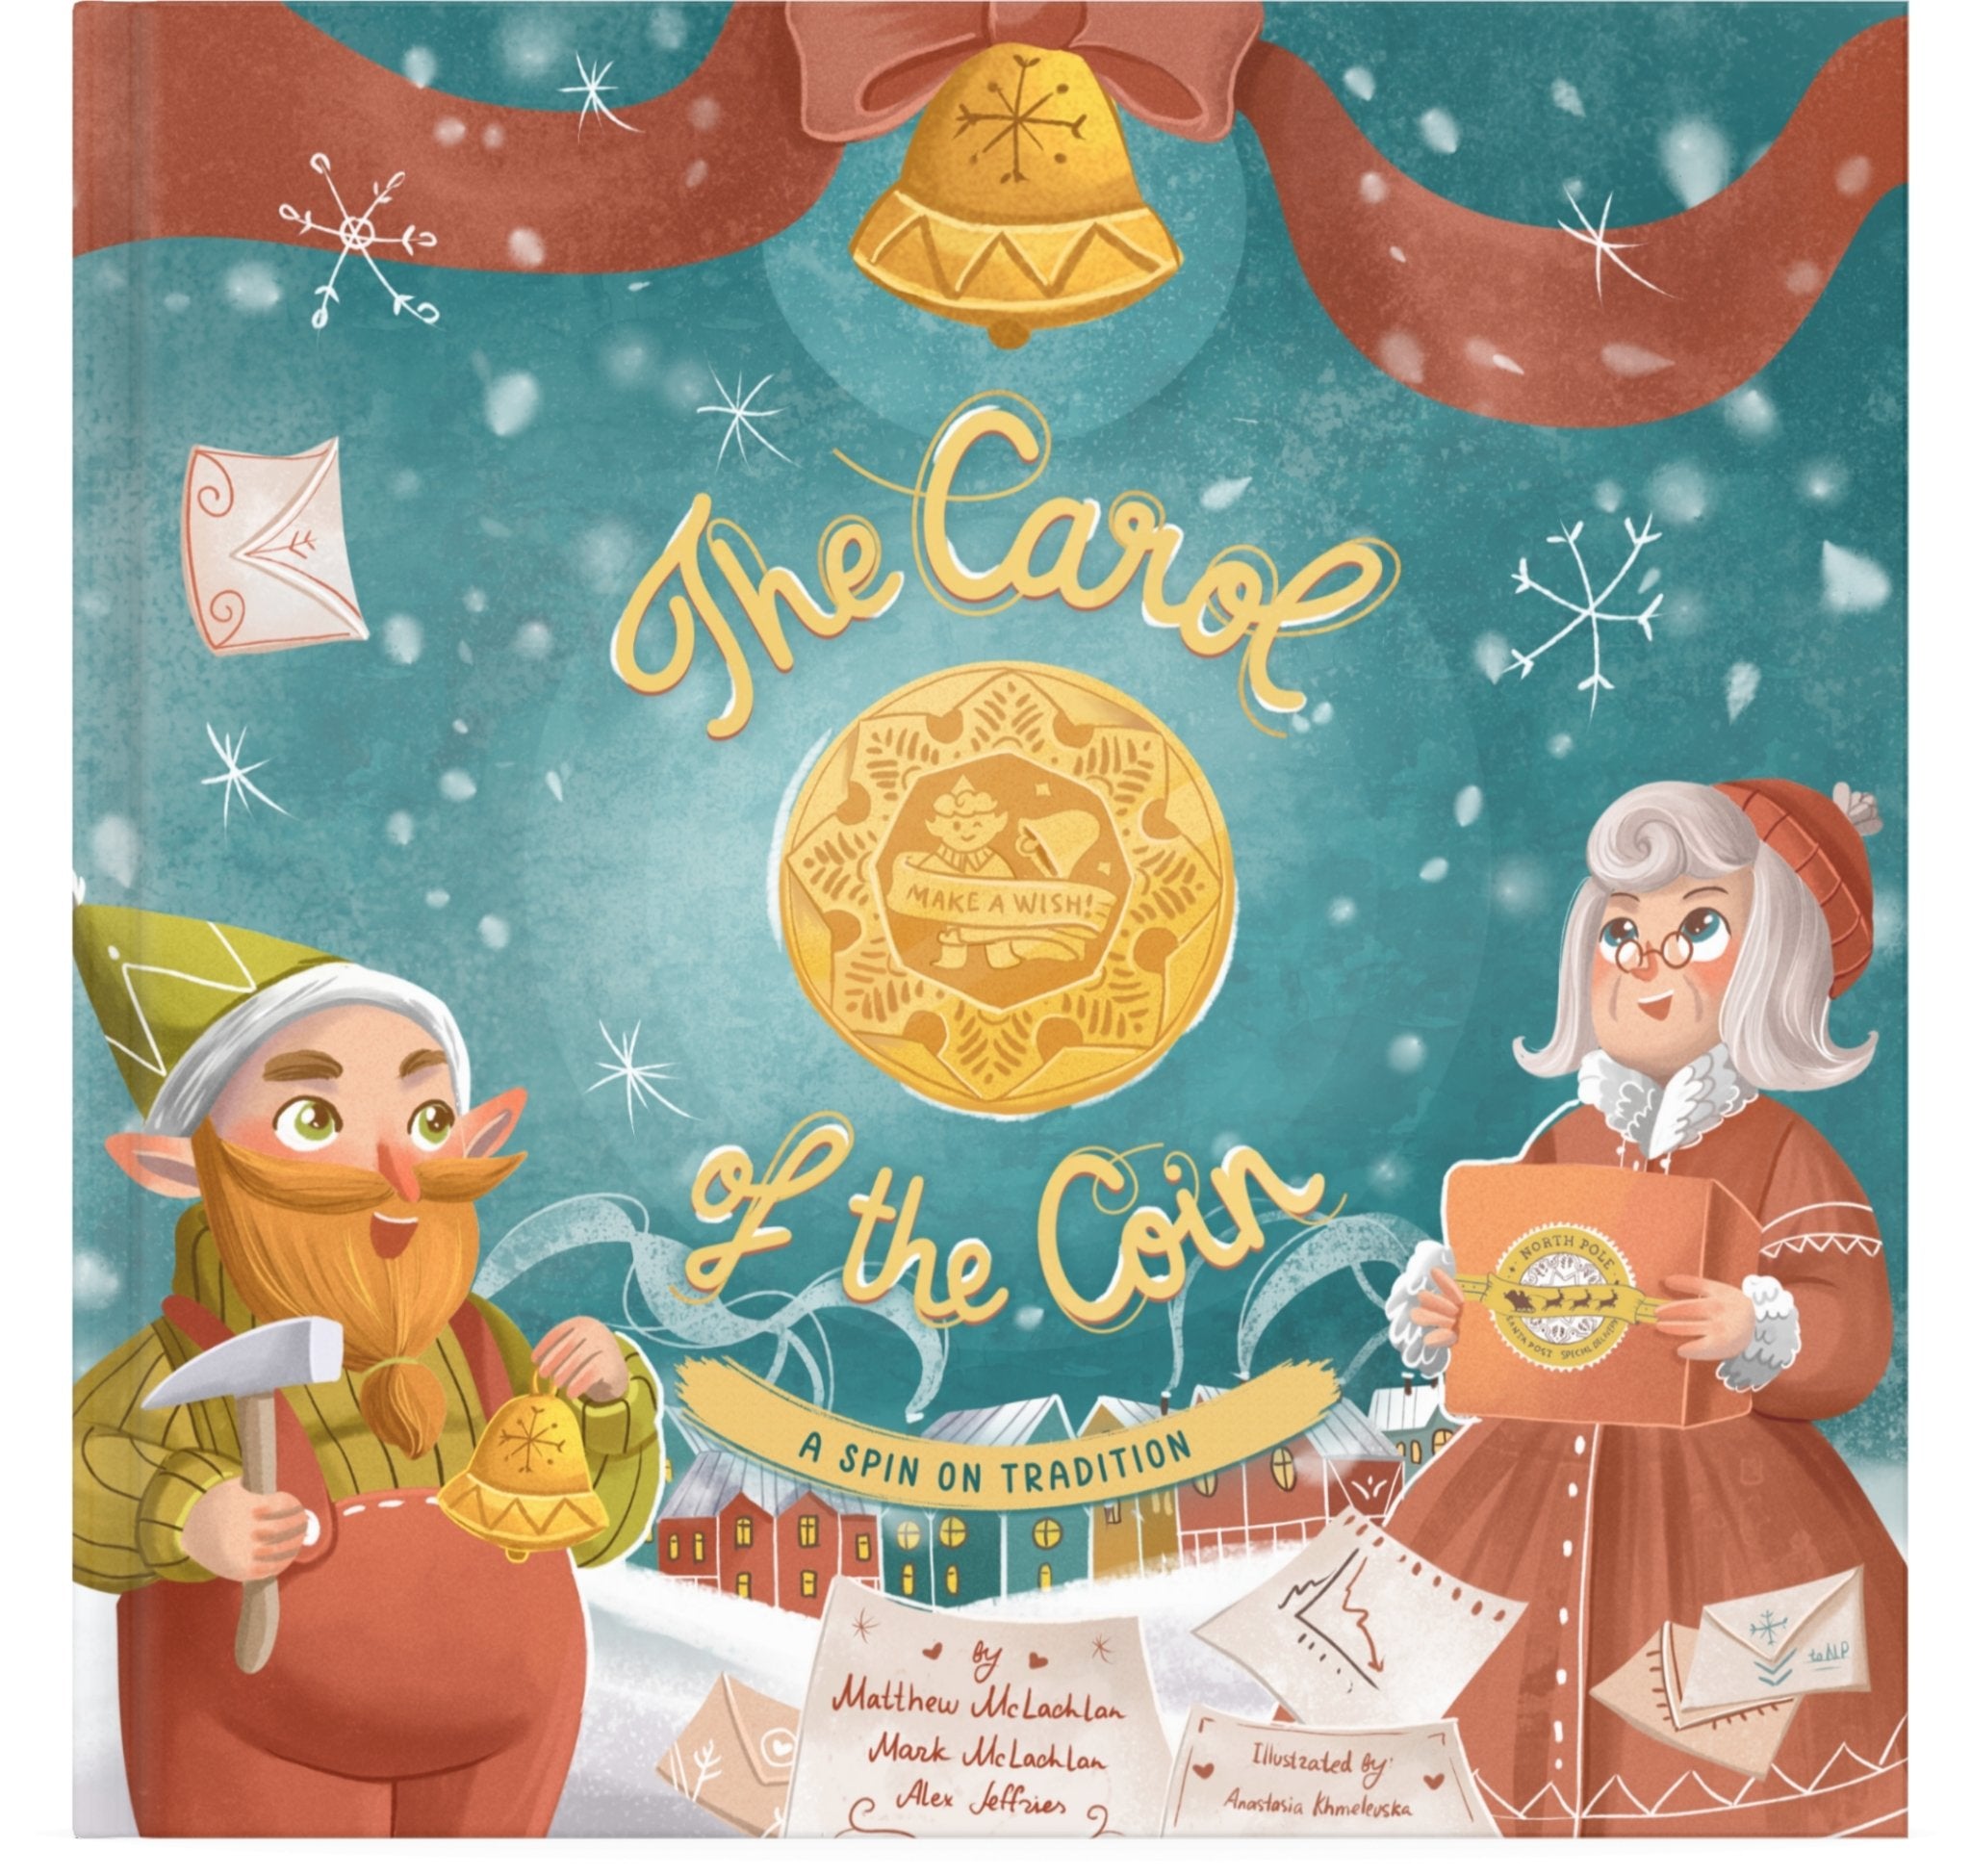 The Carol of the Coin (Book)